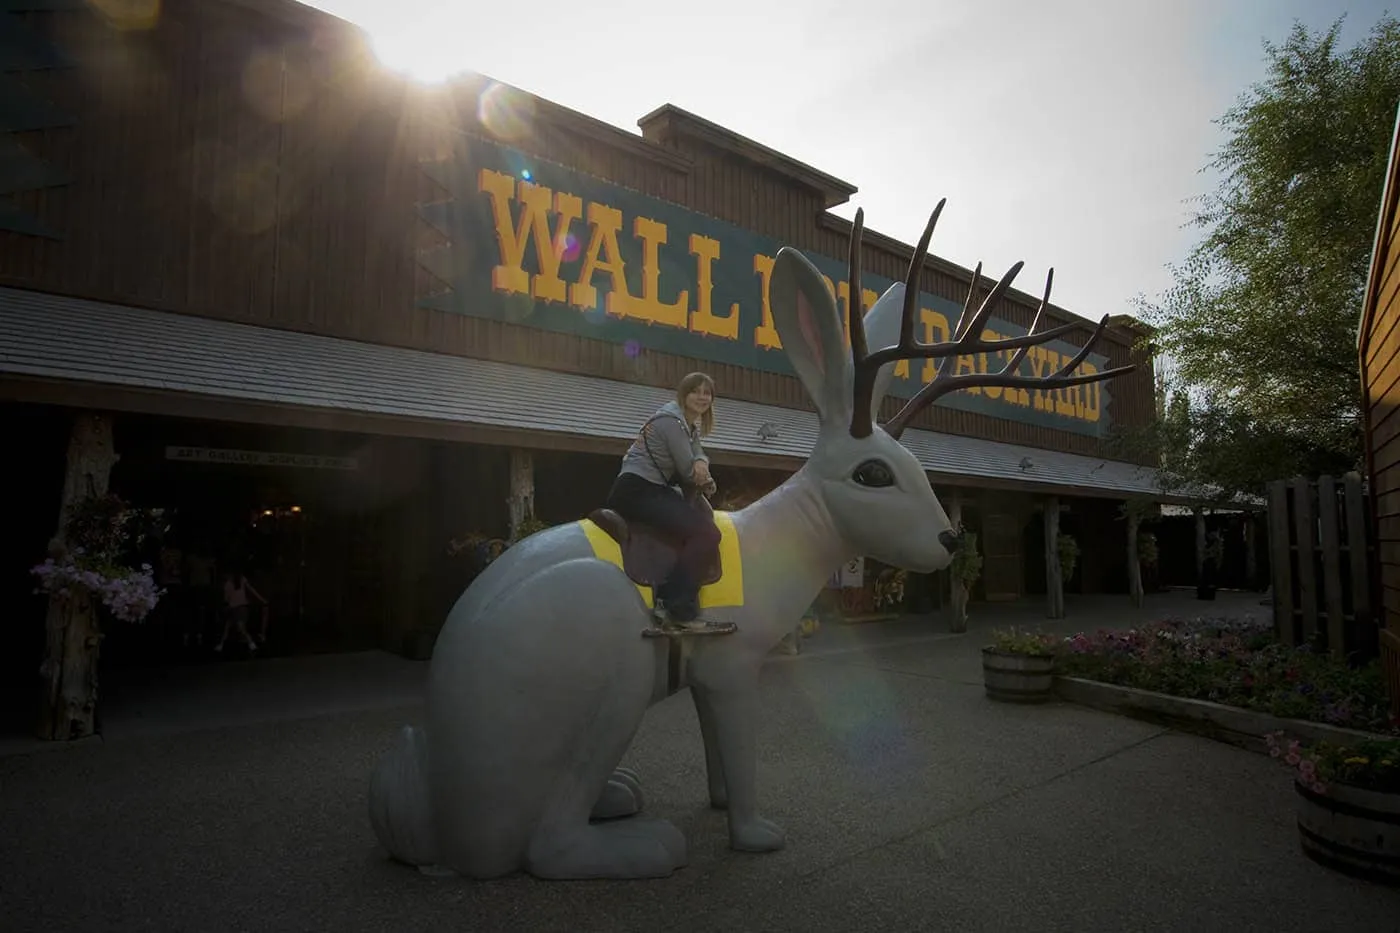 Ride the Jackalope at Wall Drug Store in Wall, South Dakota